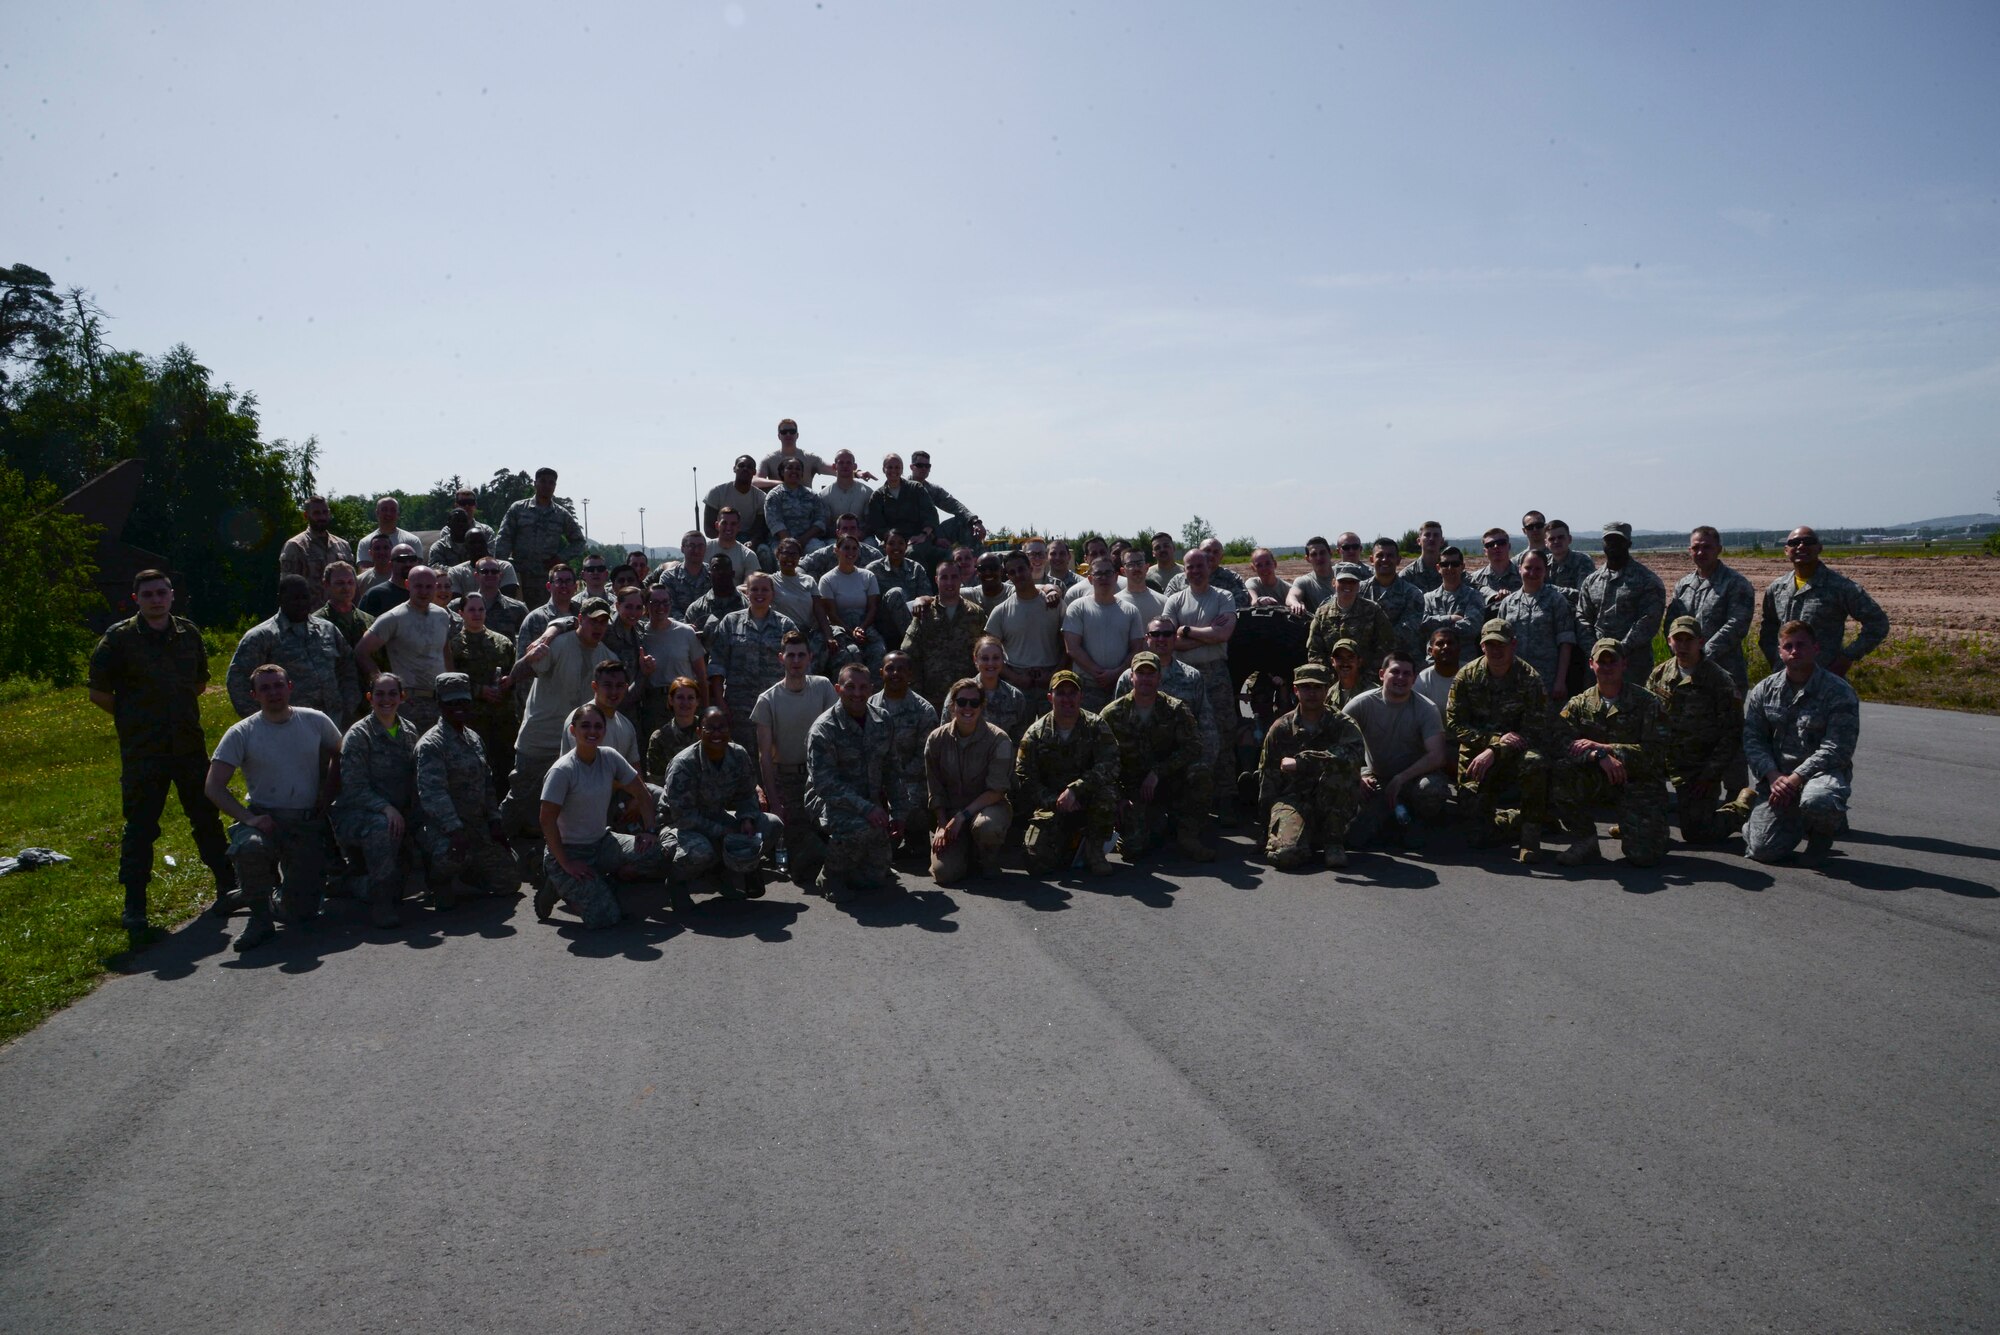 Atlantic Stripe Conference participants pose for a group photo after an obstacle course on Ramstein Air Base, Germany, May 18, 2018. The Airmen were selected to attend the conference because of their potential to serve in higher leadership positions as they continue throughout their careers. (U.S. Air Force photo by Airman 1st Class D. Blake Browning)